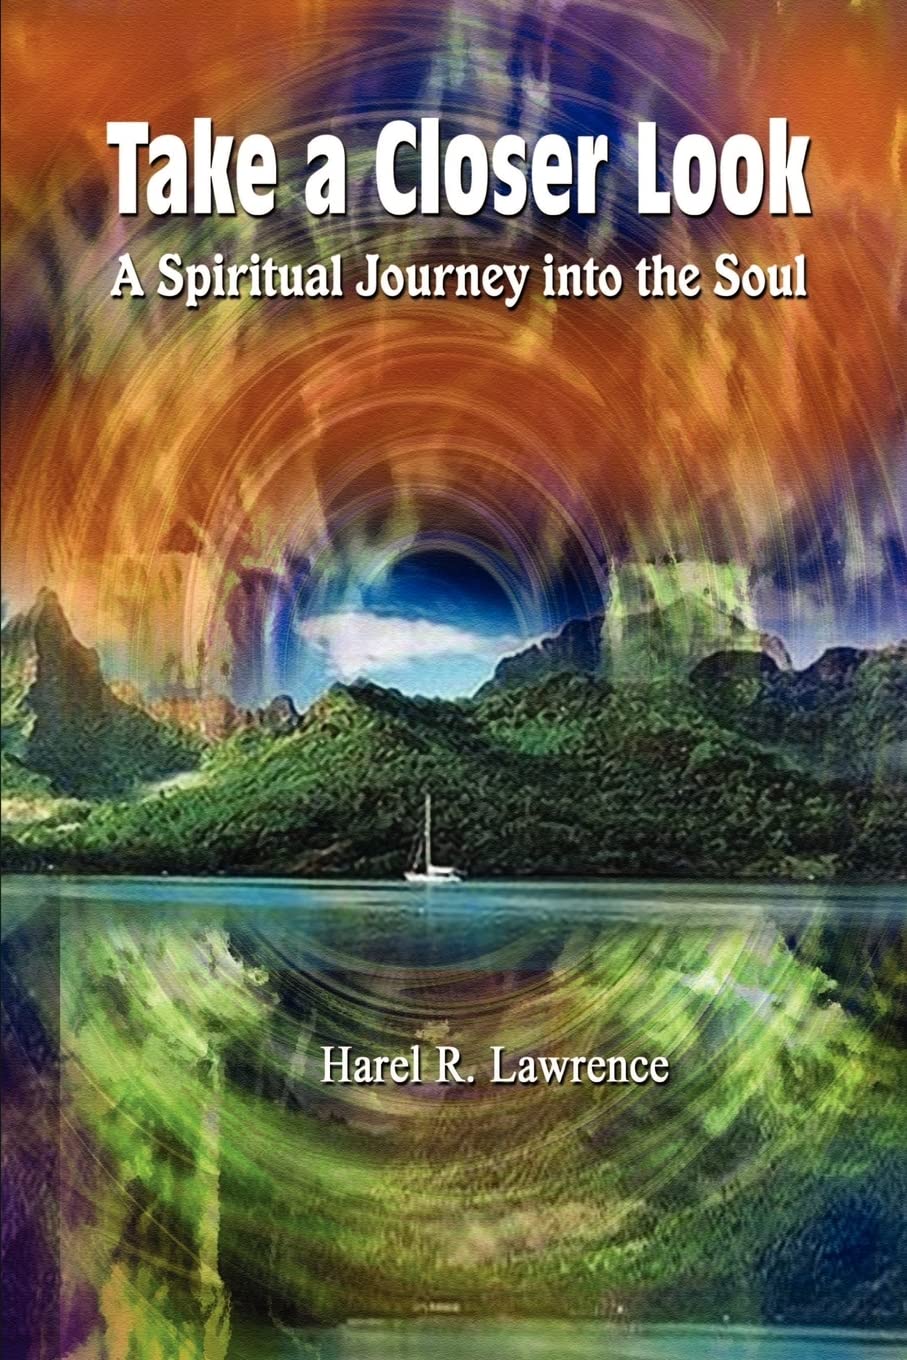 Take a Closer Look: A Spiritual Journey into the Soul